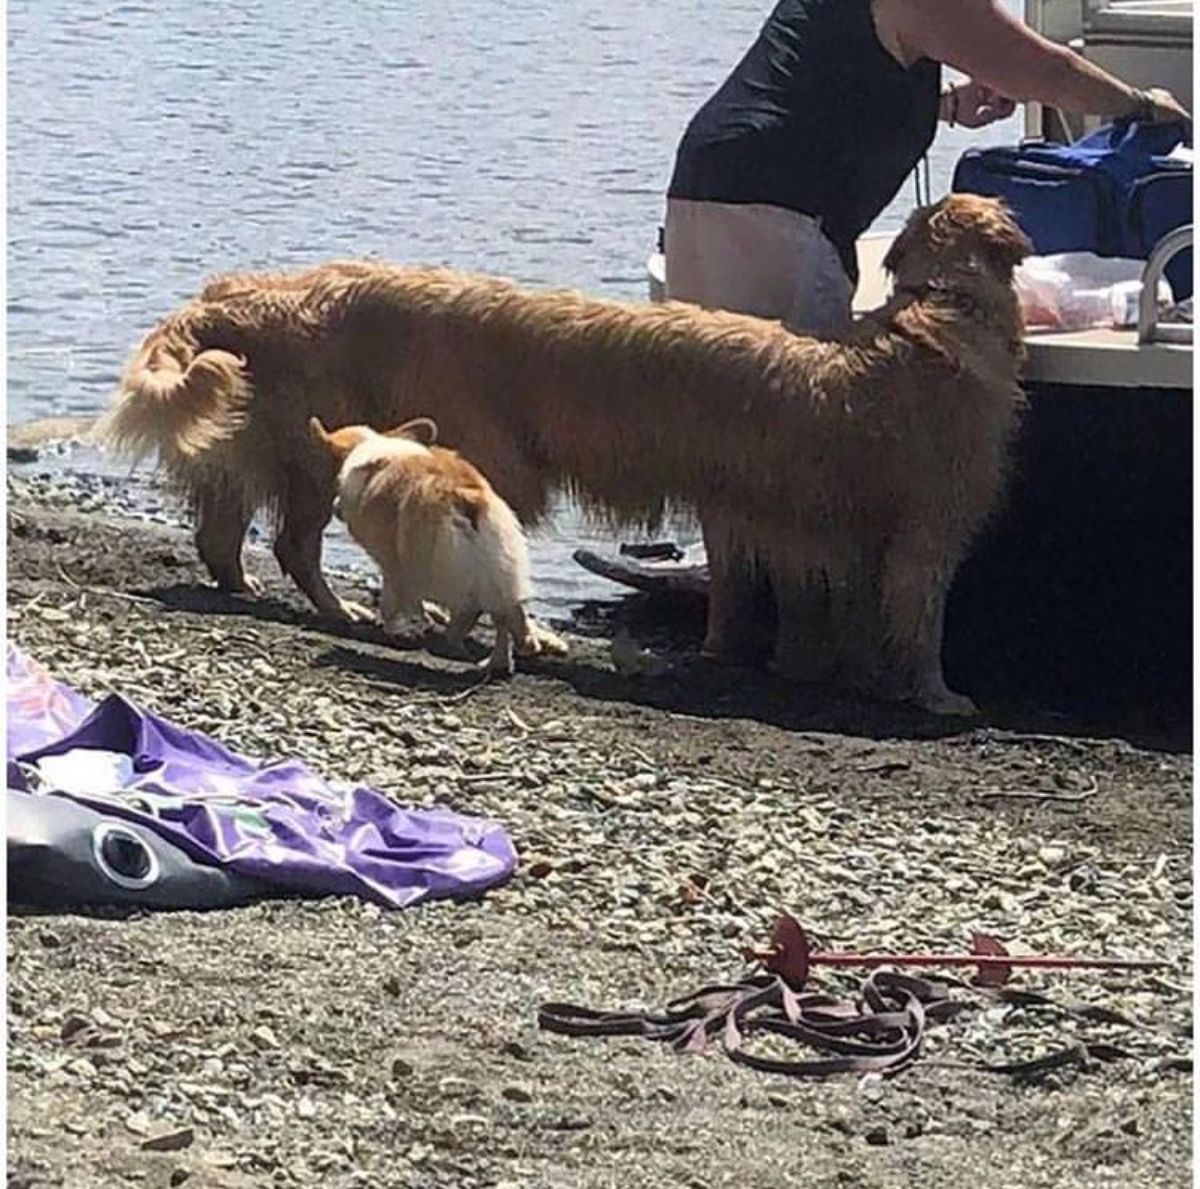 panoramic fail of brown fluffy dog with a very long body standing by water and next to a man and a small brown and white dog